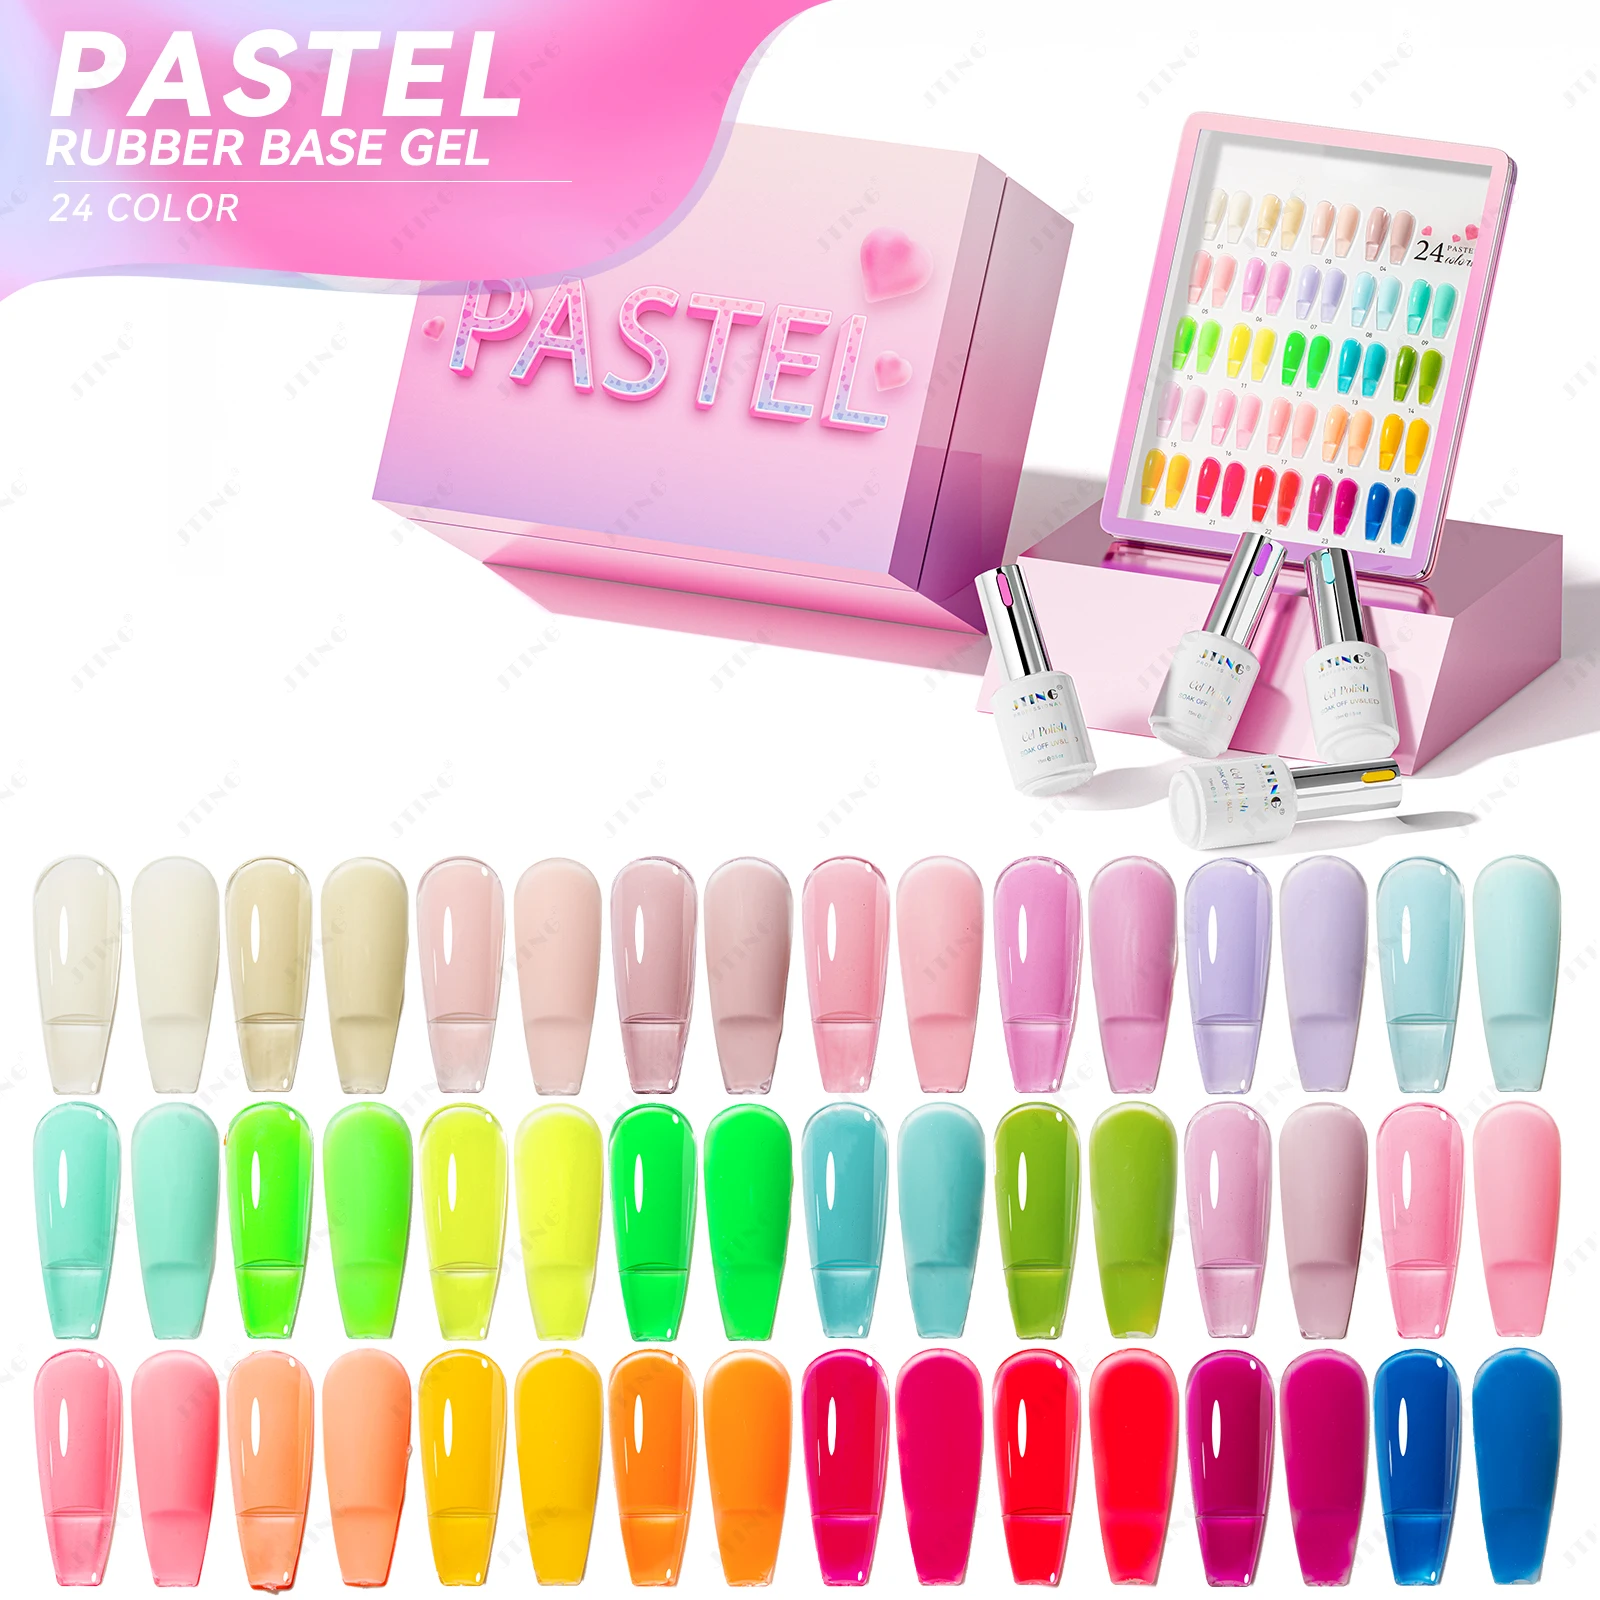 

JTING Passion hot selling 24Colors rubber base gel polish collection set box Free book color rubber base coat gel nail poli